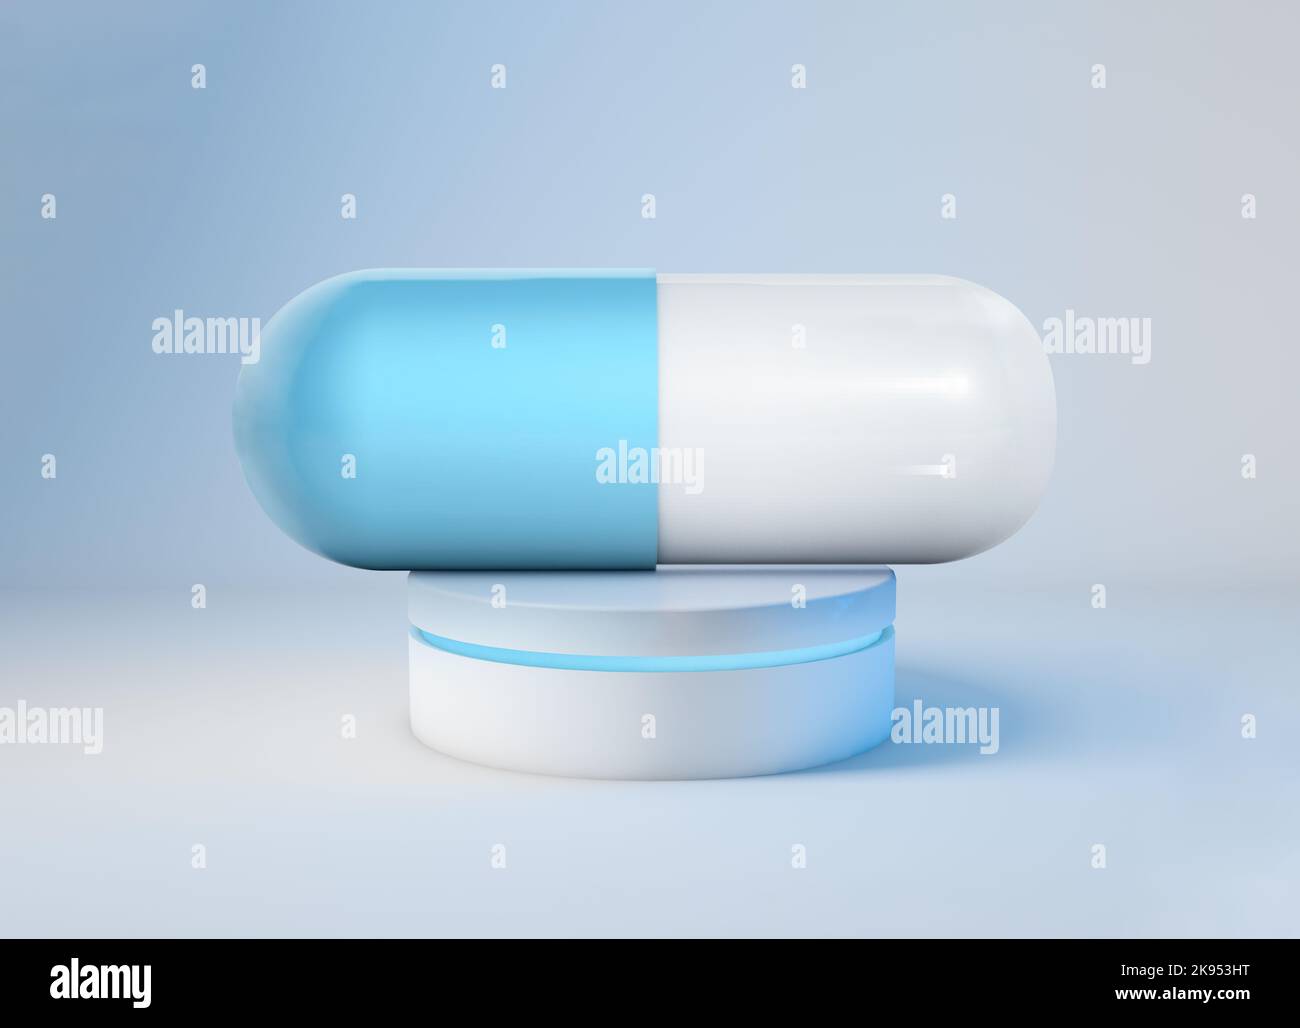 A 3D render of a large blue white medical capsule on an illuminated platform Stock Photo